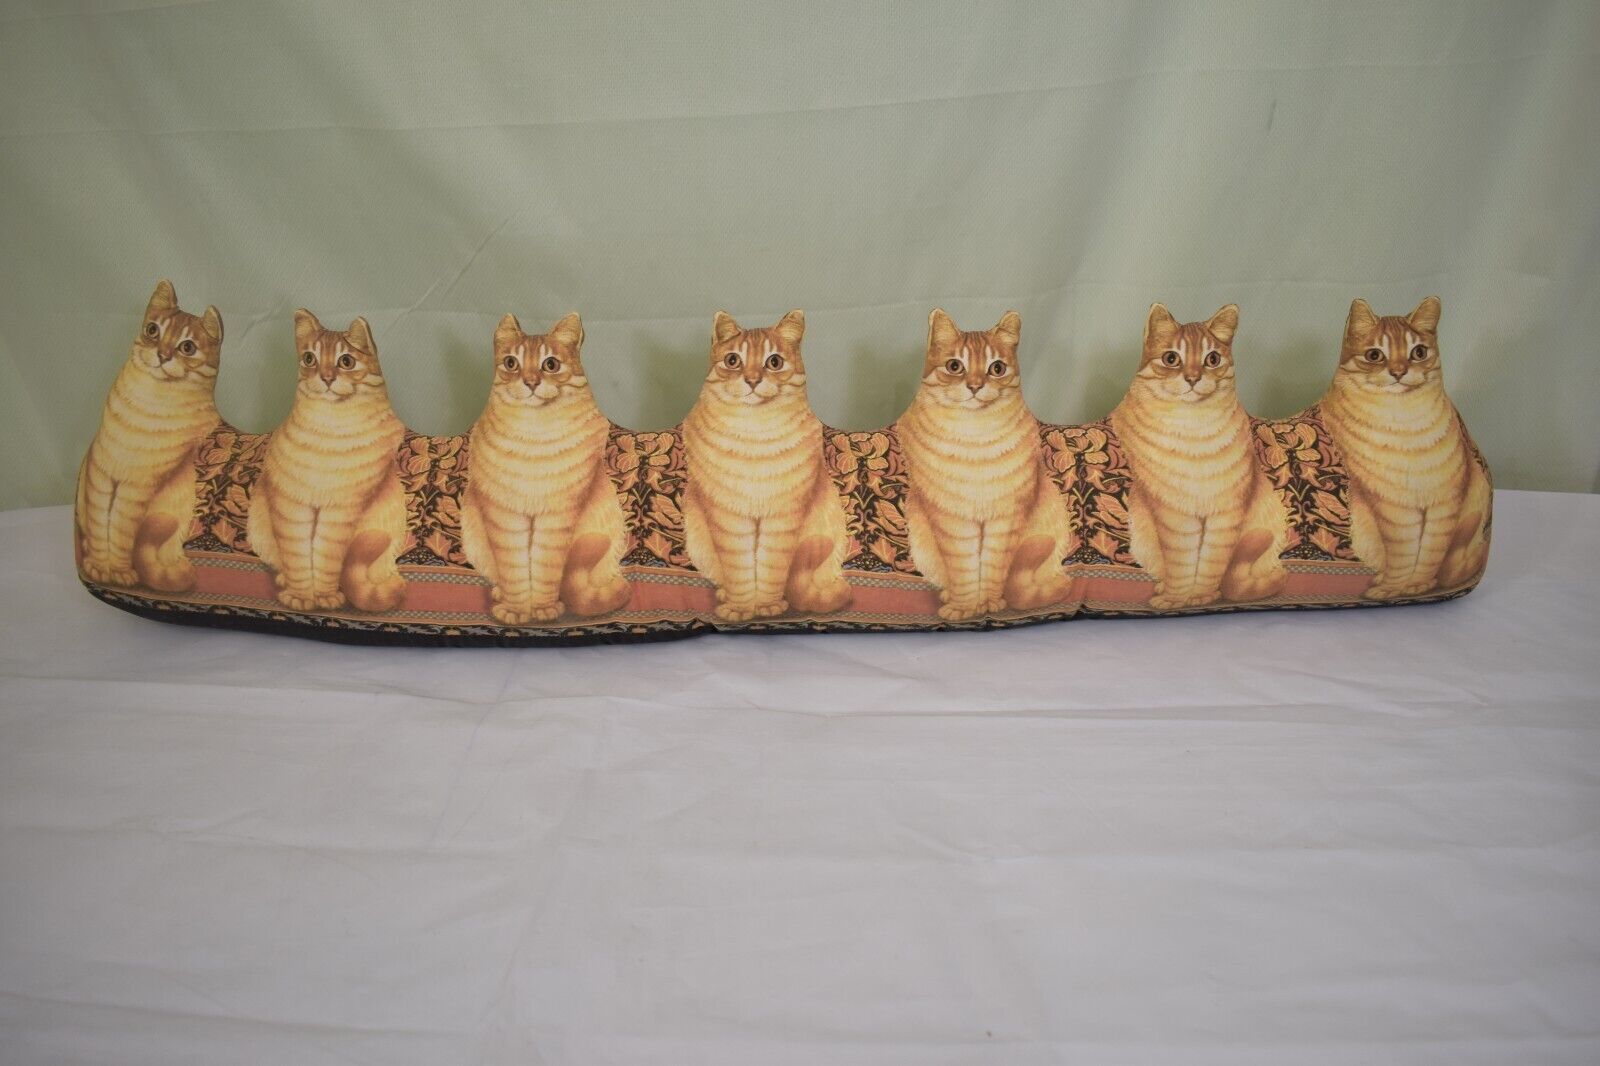 Lesley Anne Vintage Door Draft Stopper Sewn Weighted Fabric Row Kitty Cats 1997